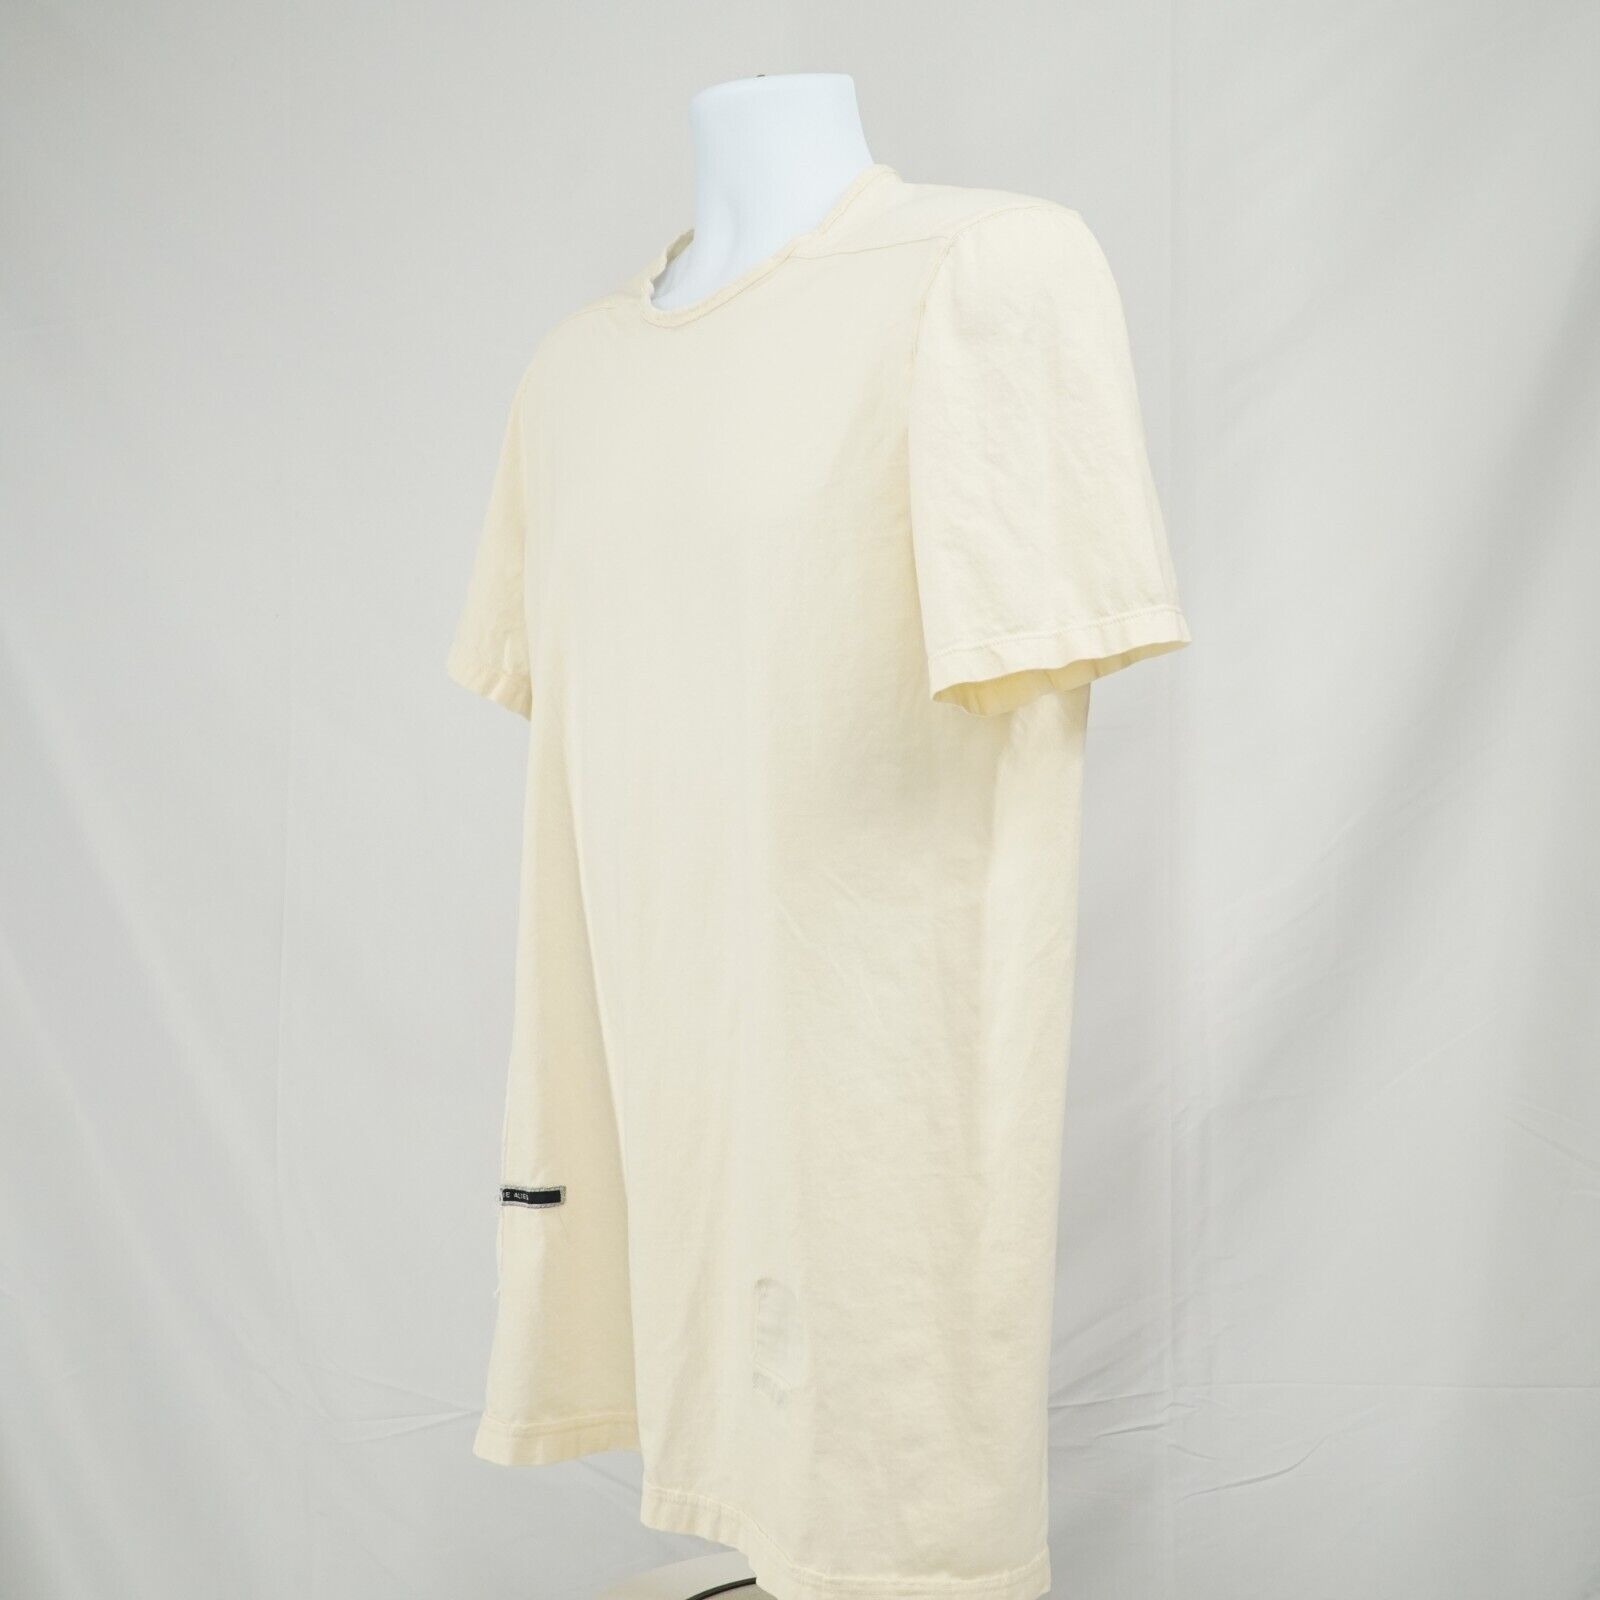 DRKSDHW Patched Level Tee Milk White Cotton - Lar - 10